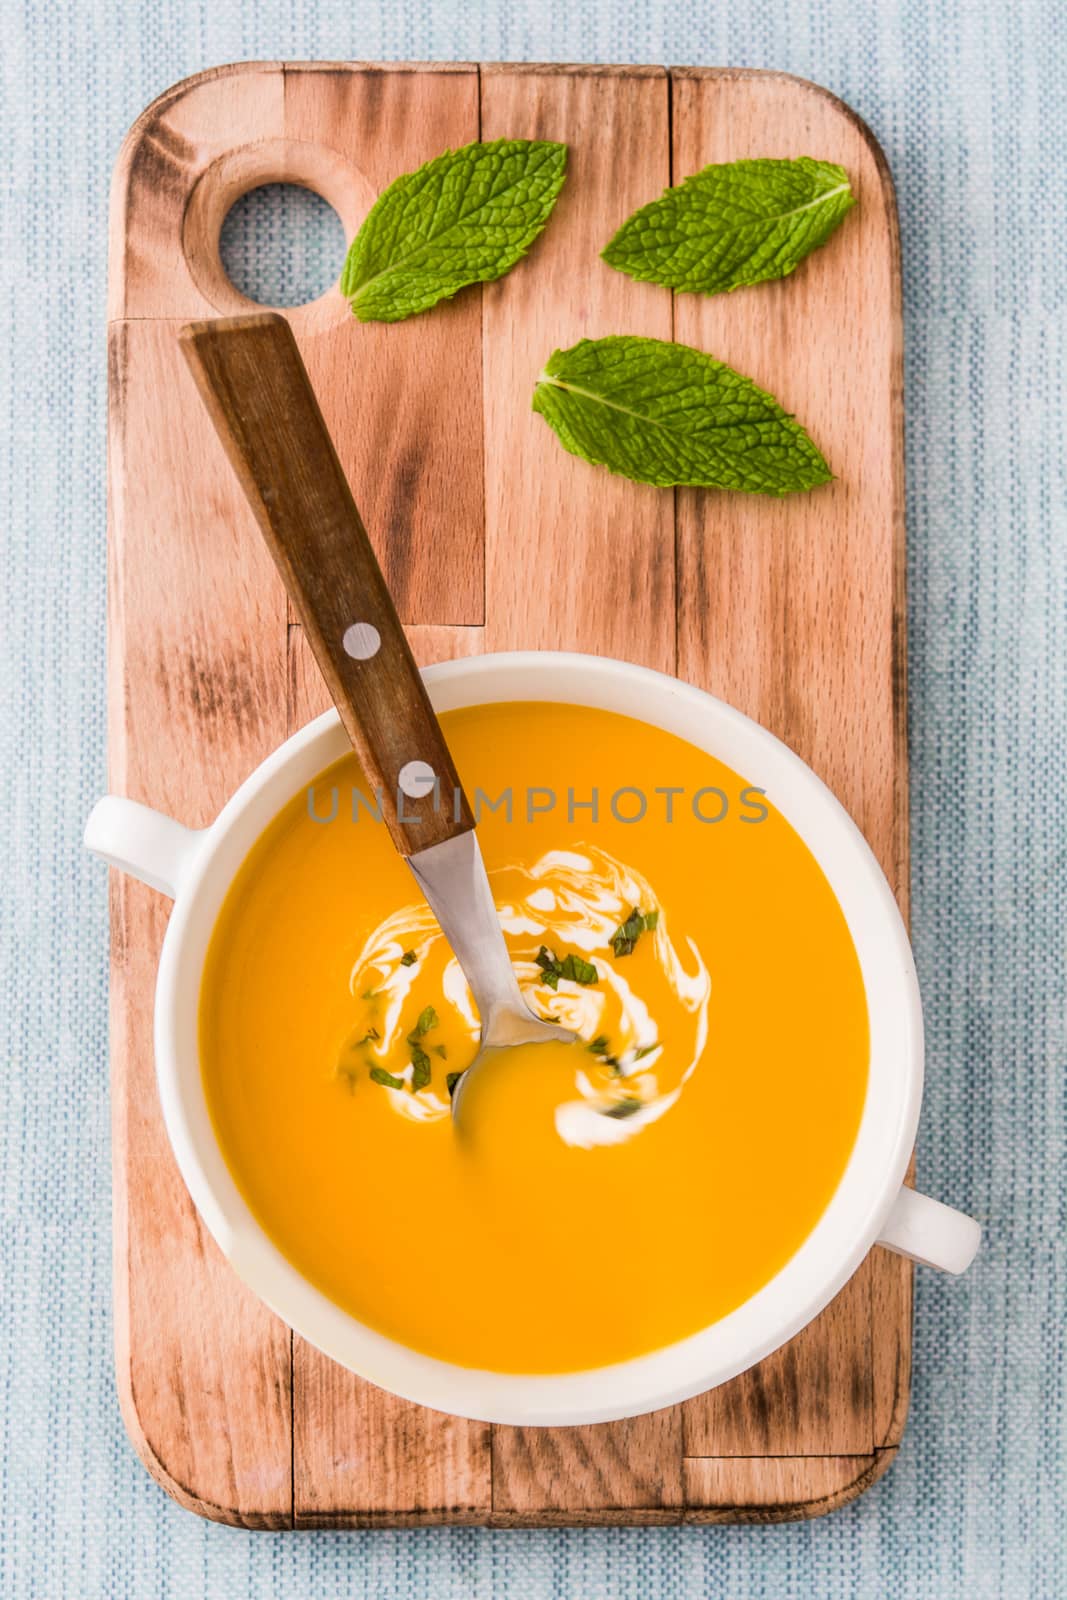 Pumpkin soup in white bowl on blue background by chandlervid85